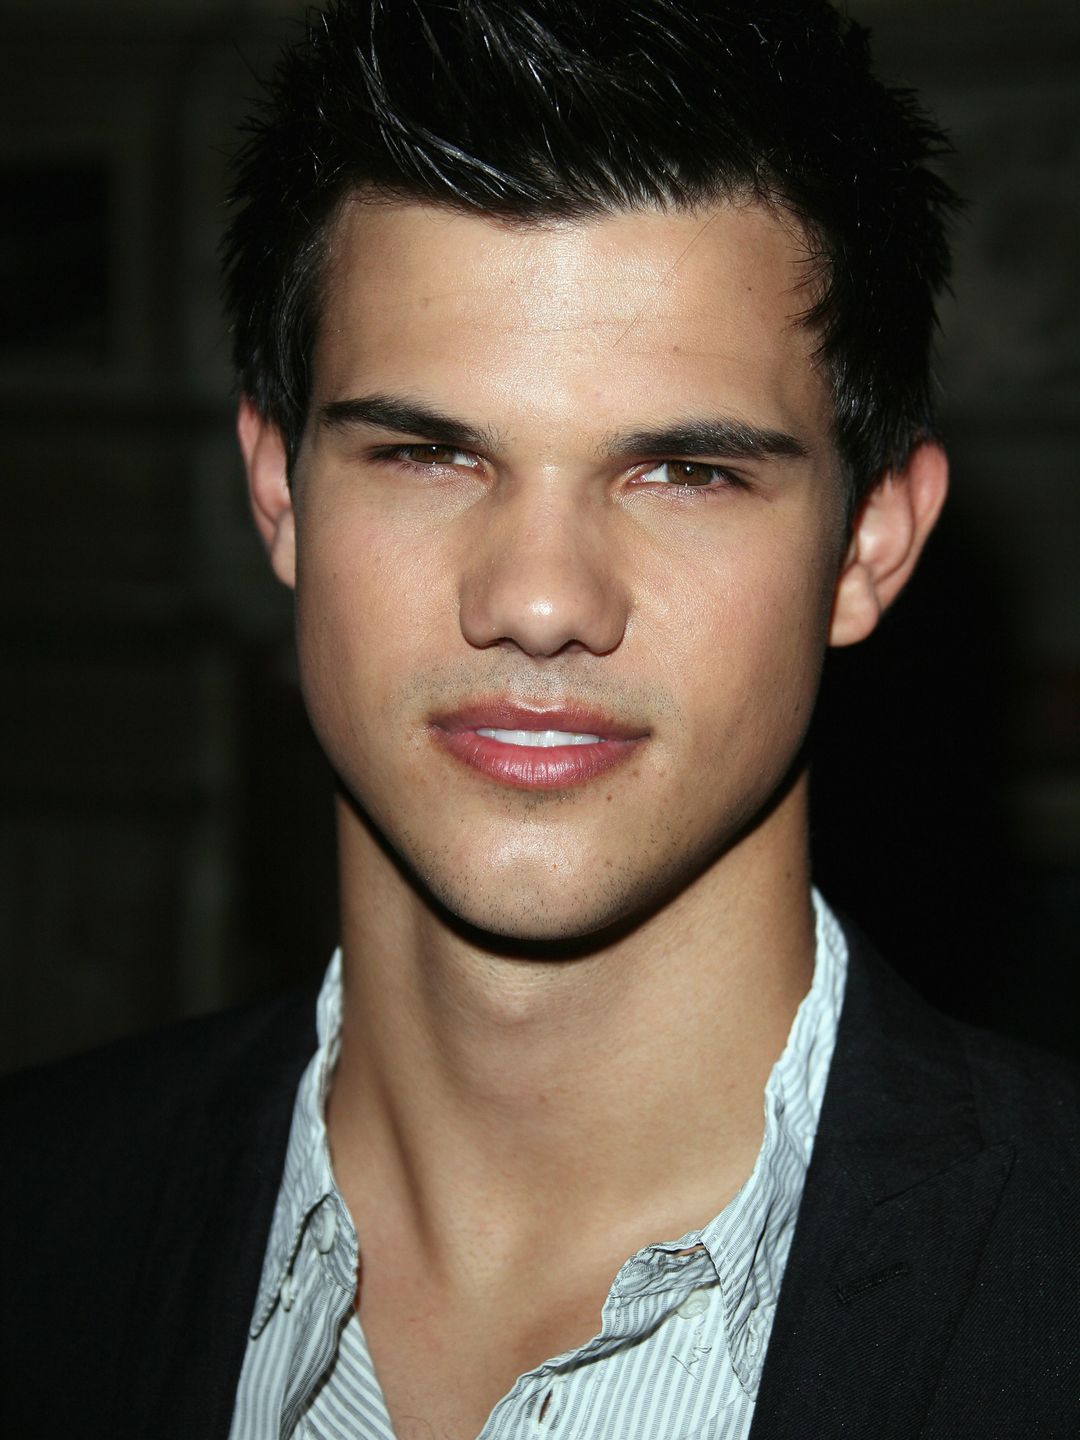 Taylor Lautner in his youth